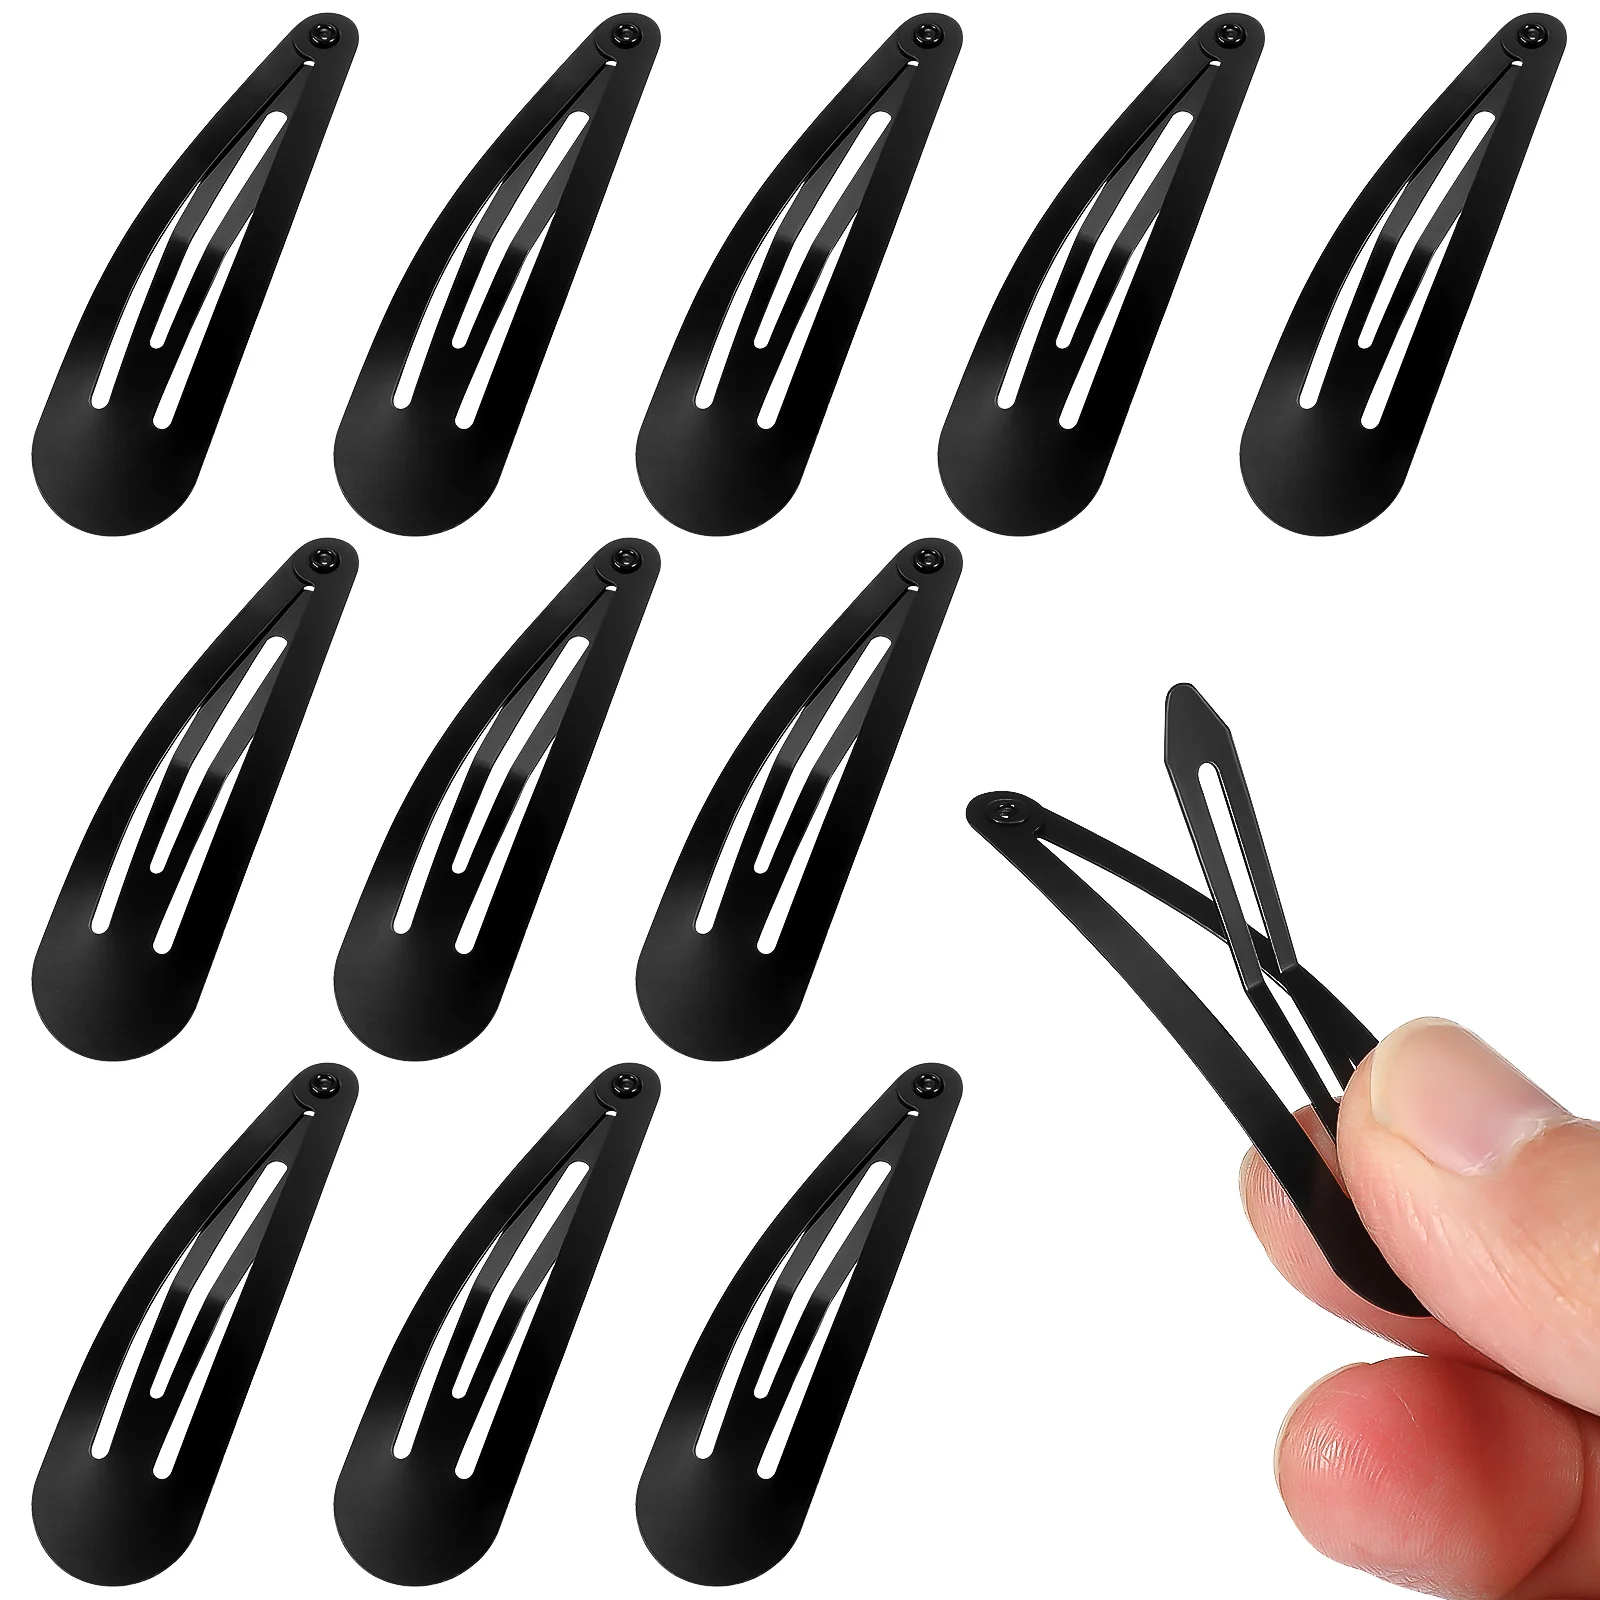 

50 Pcs Styling Tools & Accessories Professional Hairdressing Clips for Girl Pins Barrettes Hairpin